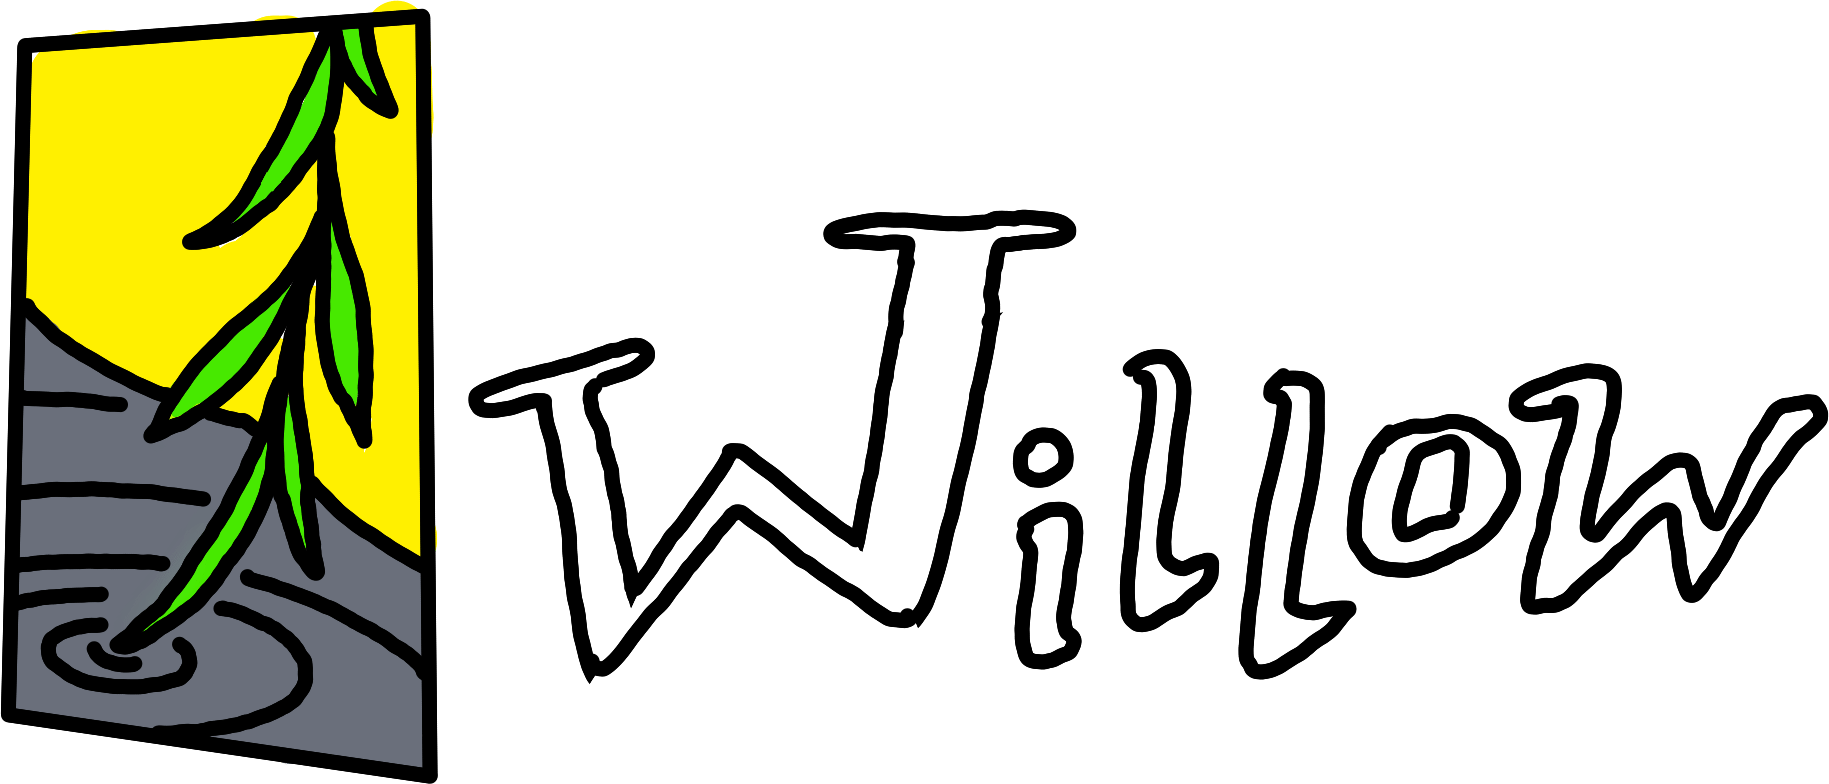 A Willow emblem: a stylised drawing of a Willow’s branch tipping into a water surface, next to a hand-lettered display of the word "Willow".